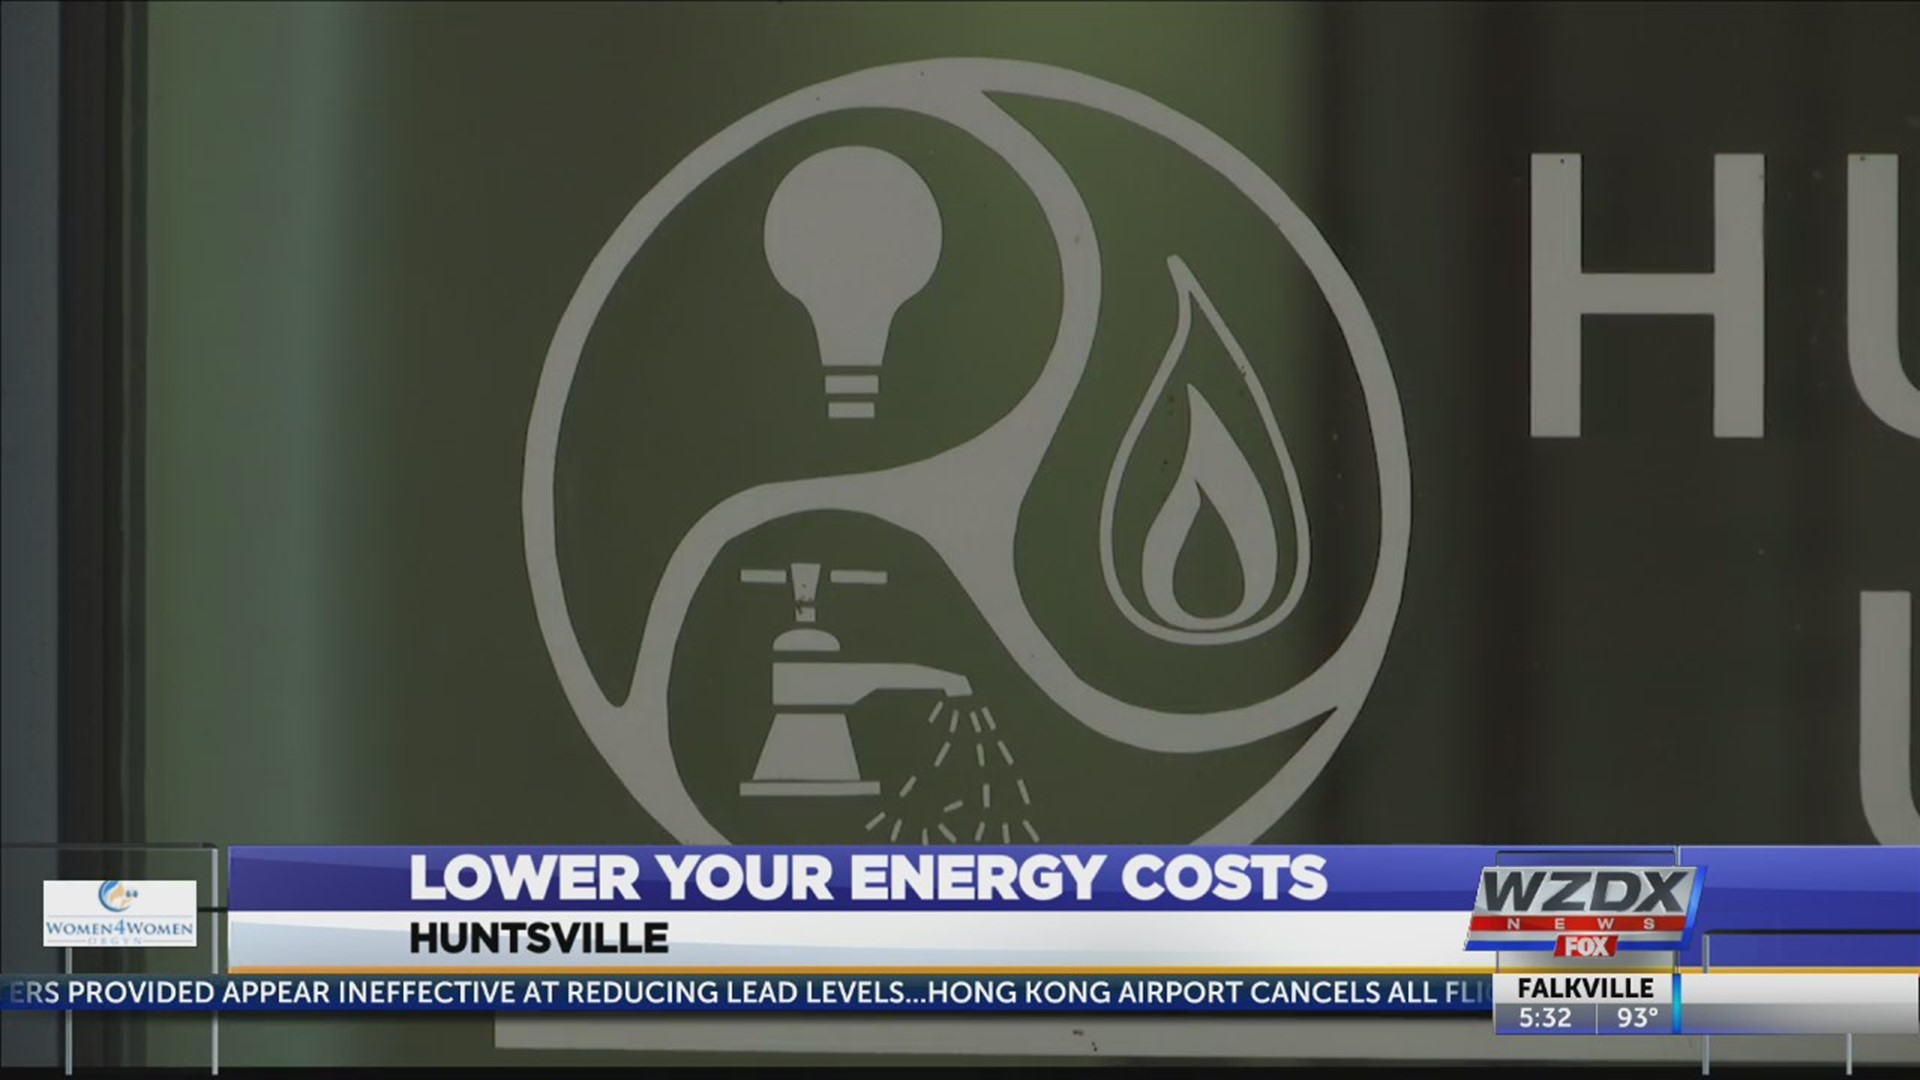 You should expect to pay a little more on your utility bill this month because of the heat.